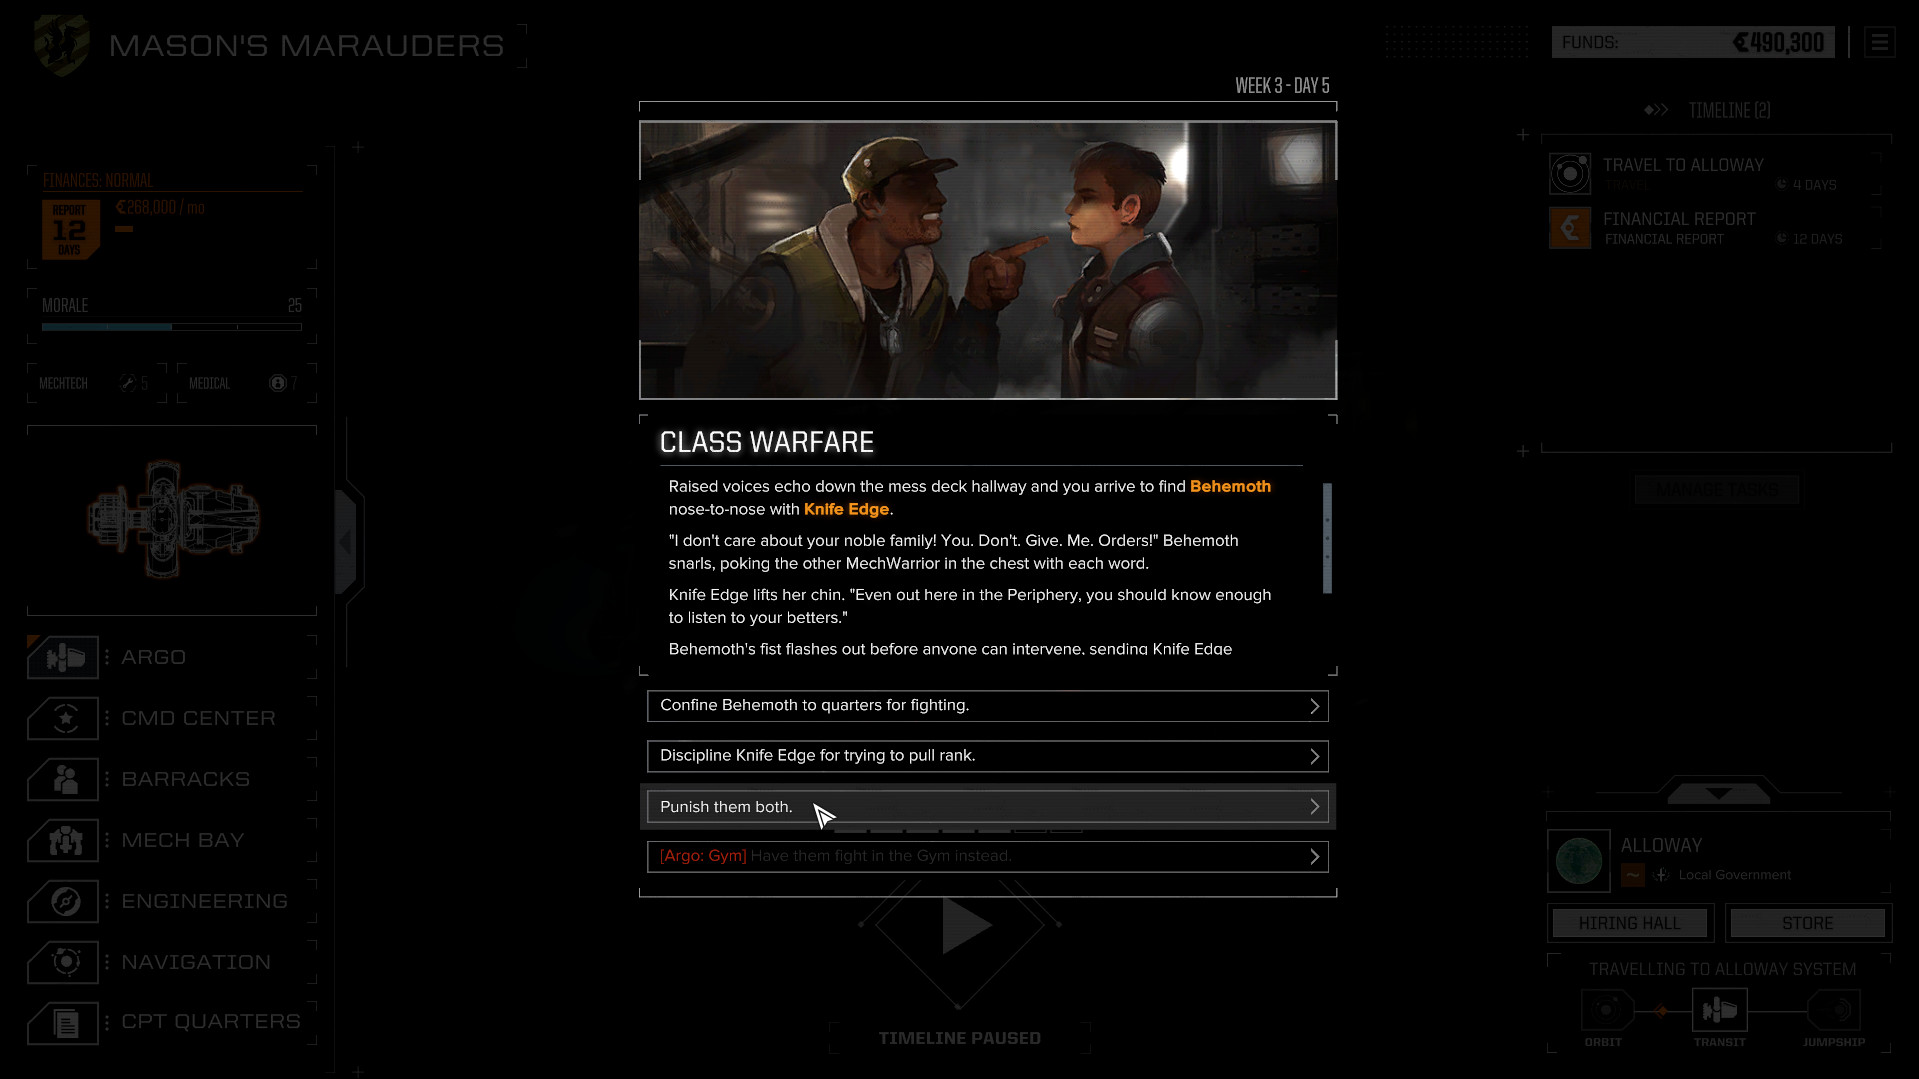 A text box describing an altercation between two members of the same mercenary company. There are three dialogue options, one of which is highlighted.